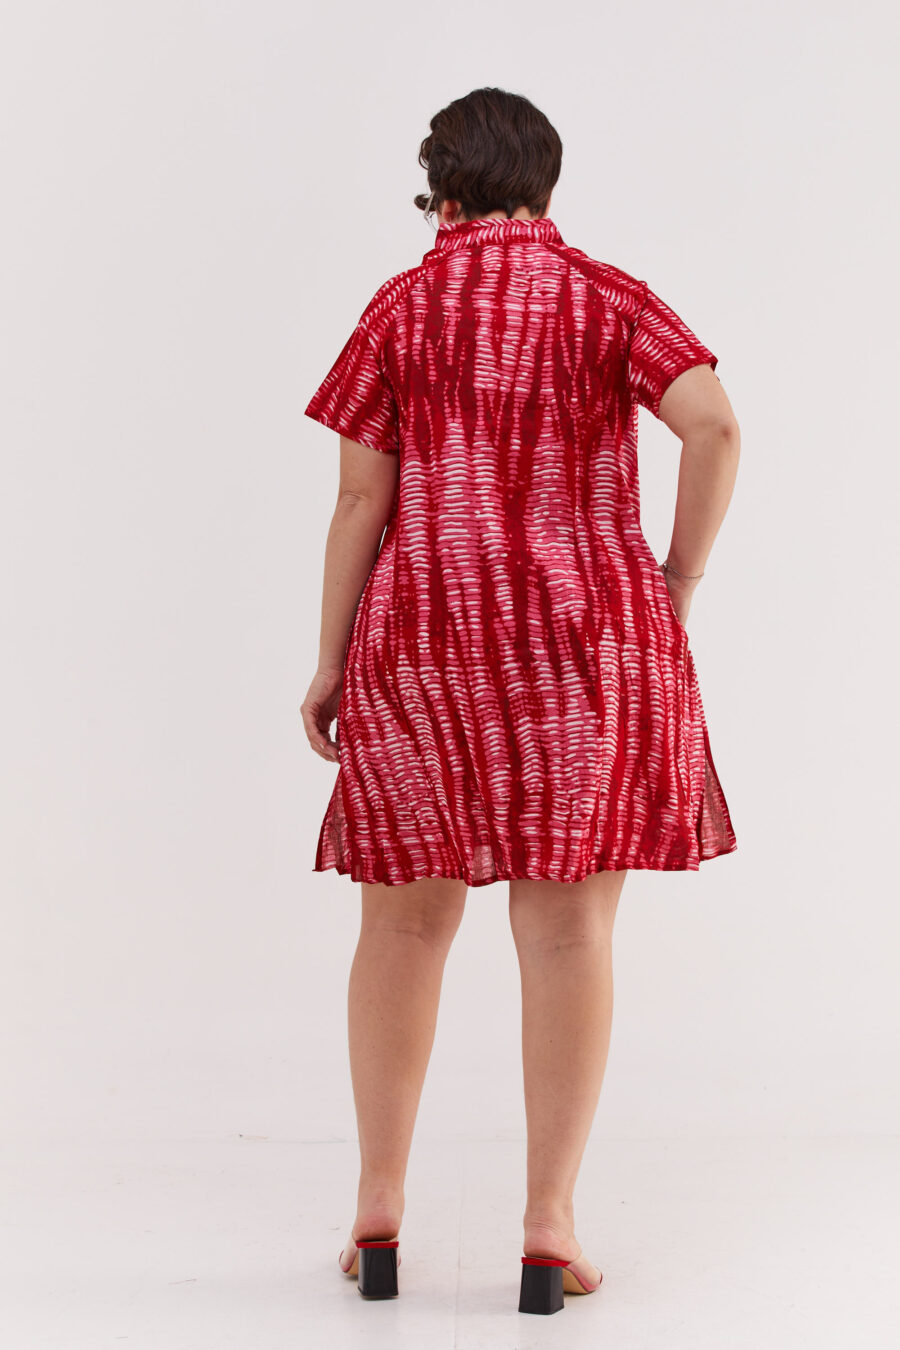 Maiko tunic | Japanese tunic with a unique high collar – Stone red print, pink tunic with red stone-like print by comfort zone boutique